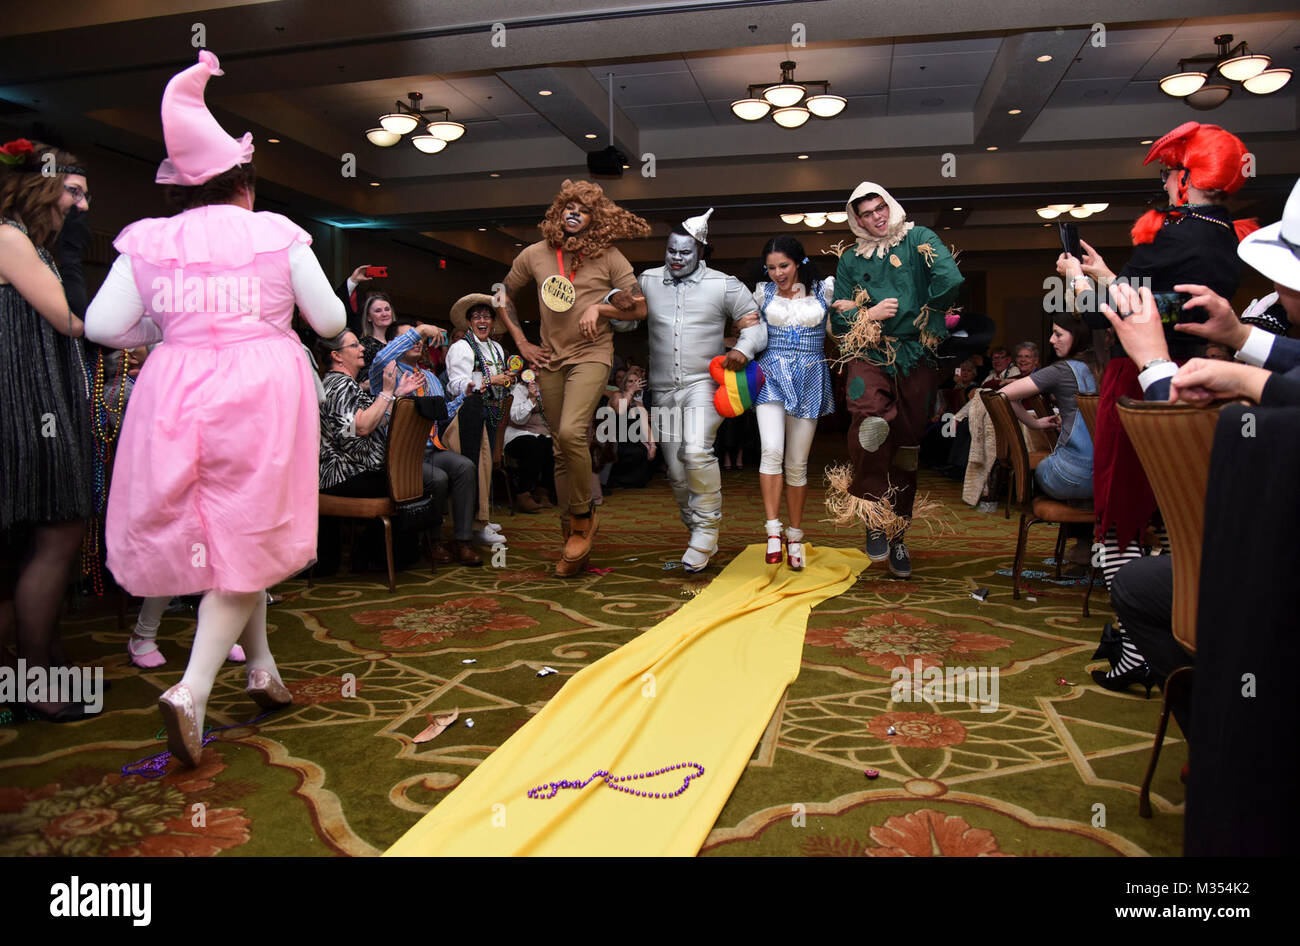 Members of the 81st Medical Operations Squadron portray the cast of The Wizard of Oz as they dance down the aisle during a Mardi Gras float contest at the 30th Annual Krewe of Medics Mardi Gras Ball at the Bay Breeze Event Center Feb. 3, 2018, on Keesler Air Force Base, Mississippi. The Krewe of Medics hosts a yearly ball to give Keesler Medical Center personnel a taste of the Gulf Coast and an opportunity to experience a traditional Mardi Gras. The theme for this year's ball was Read It-Be It. The 81st MDOS won first place in the float contest. (U.S. Air Force Stock Photo